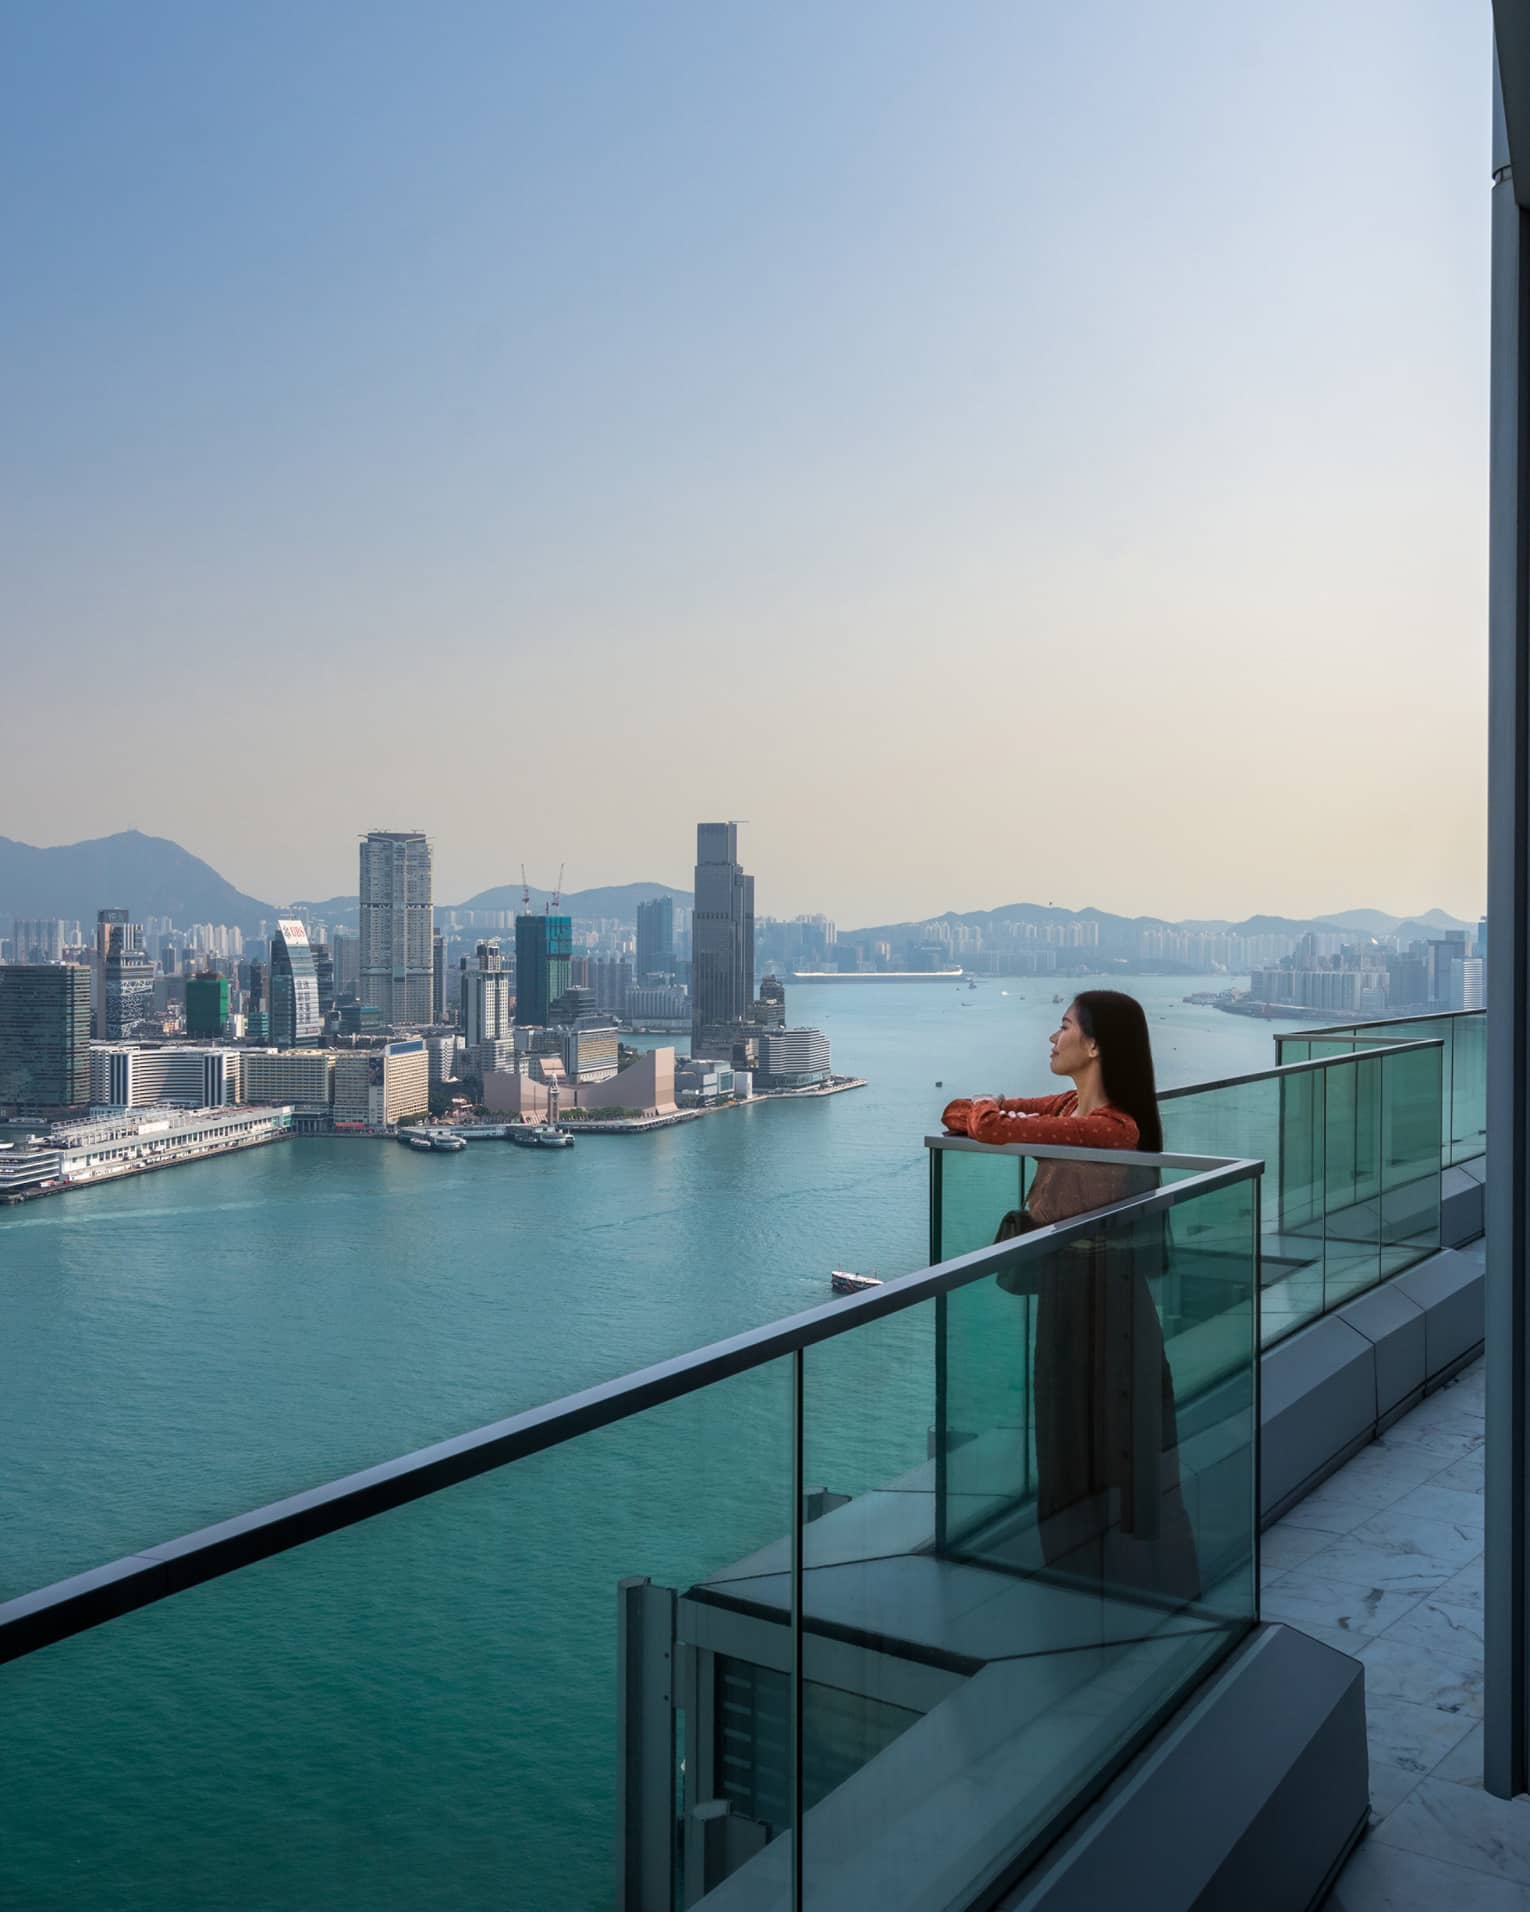 A woman standing on a balcony looking out at water and a city.